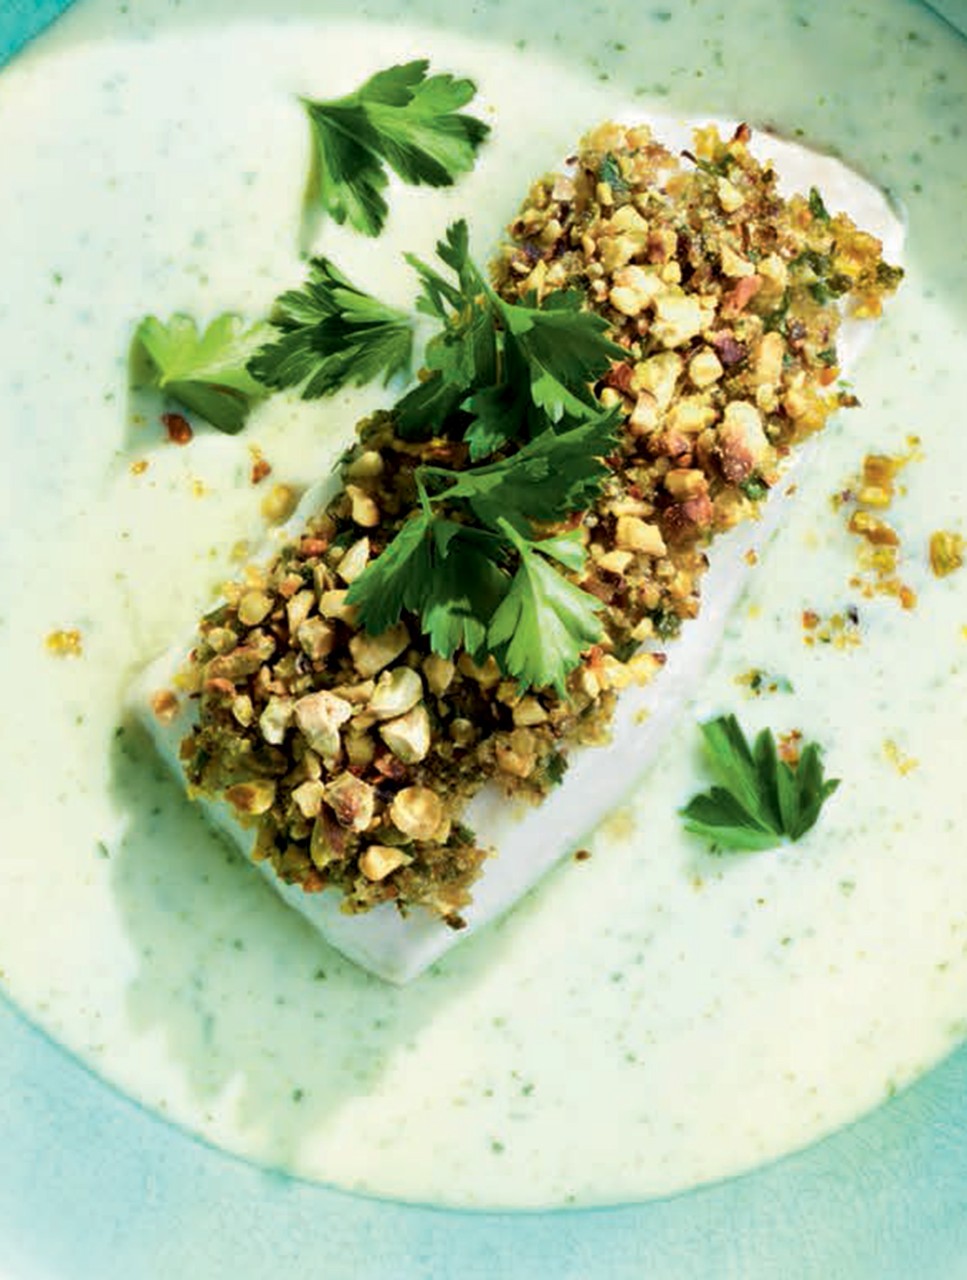 Pistachio-Crusted Halibut on Green Onion Vichyssoise